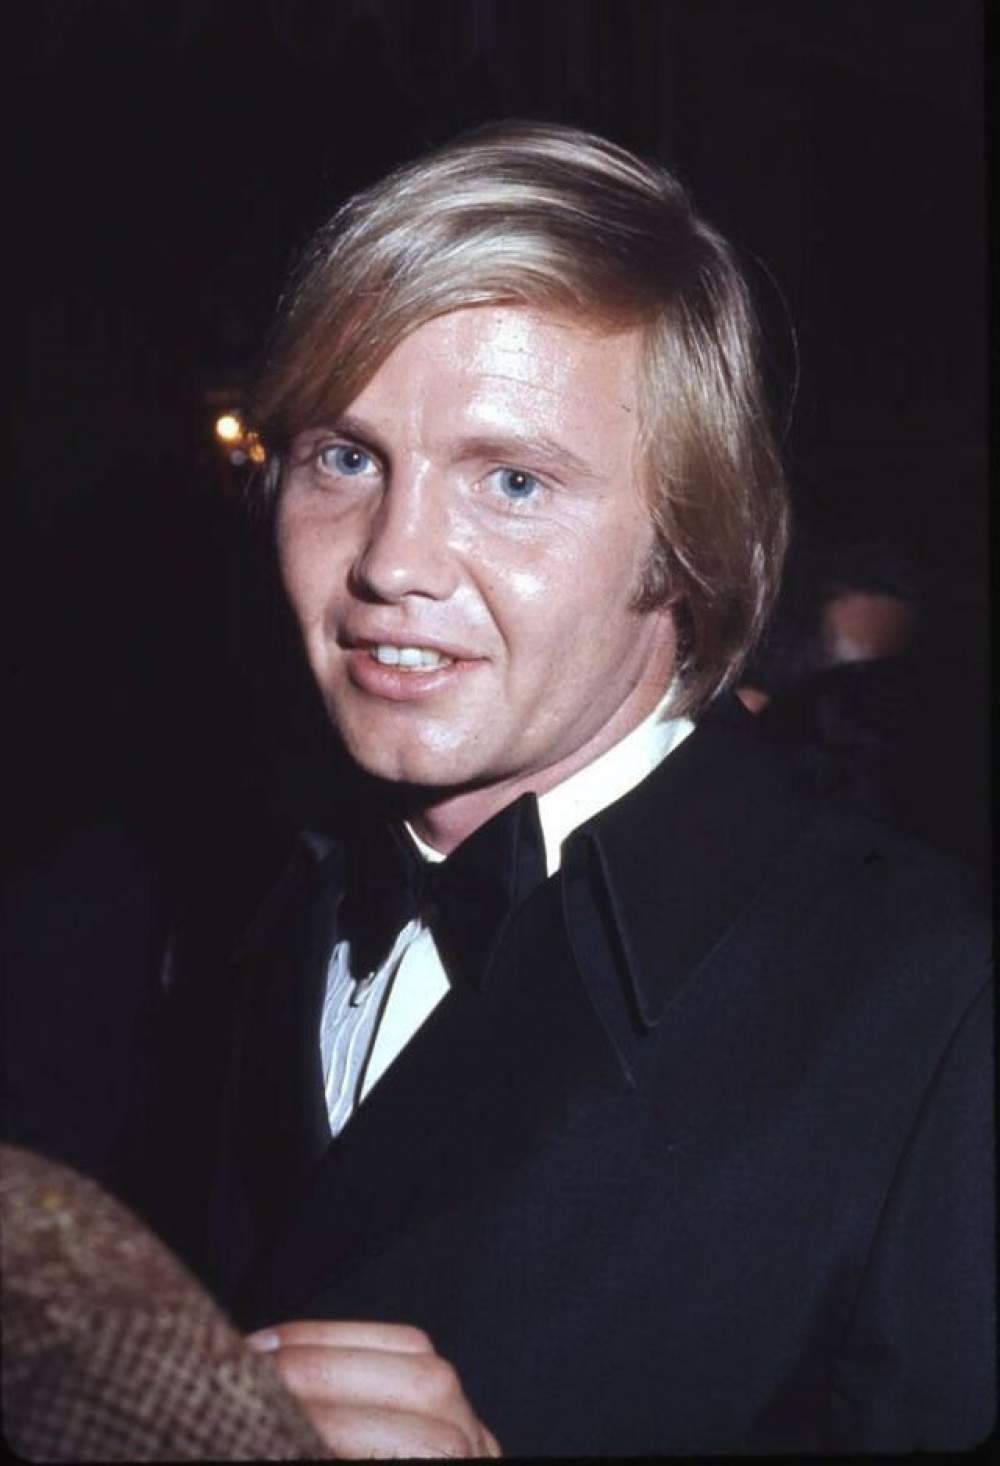 Ungejon Voight (for A Computer Or Mobile Wallpaper Featuring A Younger Version Of Jon Voight) Wallpaper